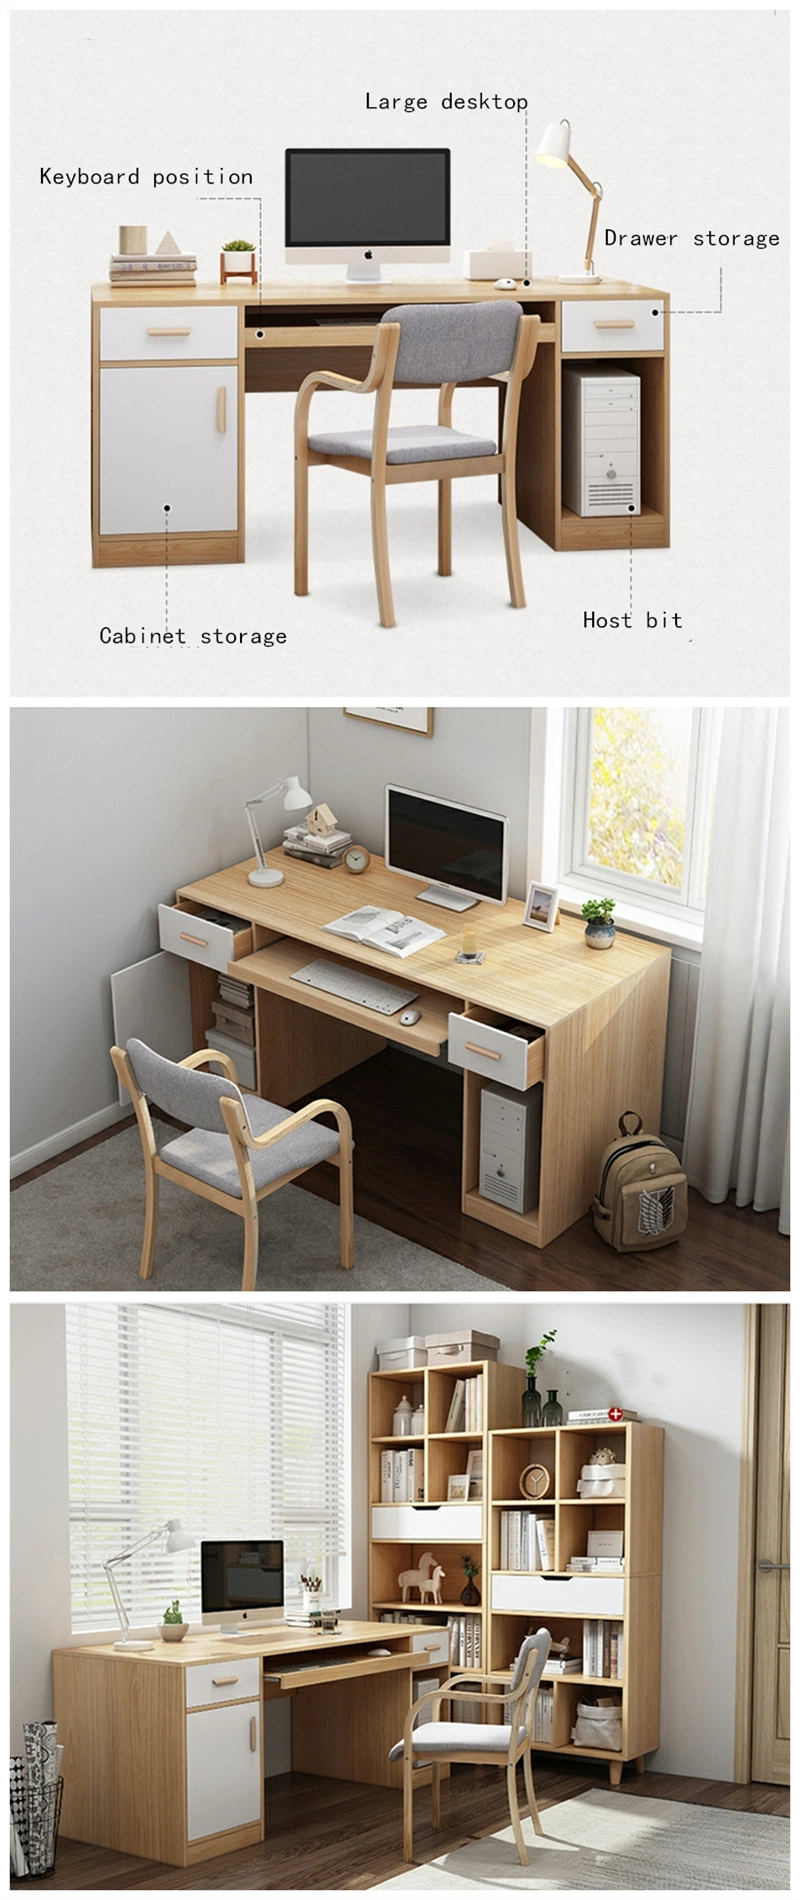 Modern Wooden School Home Furniture Folding Dining Laptop Conference Computer Study Office Table